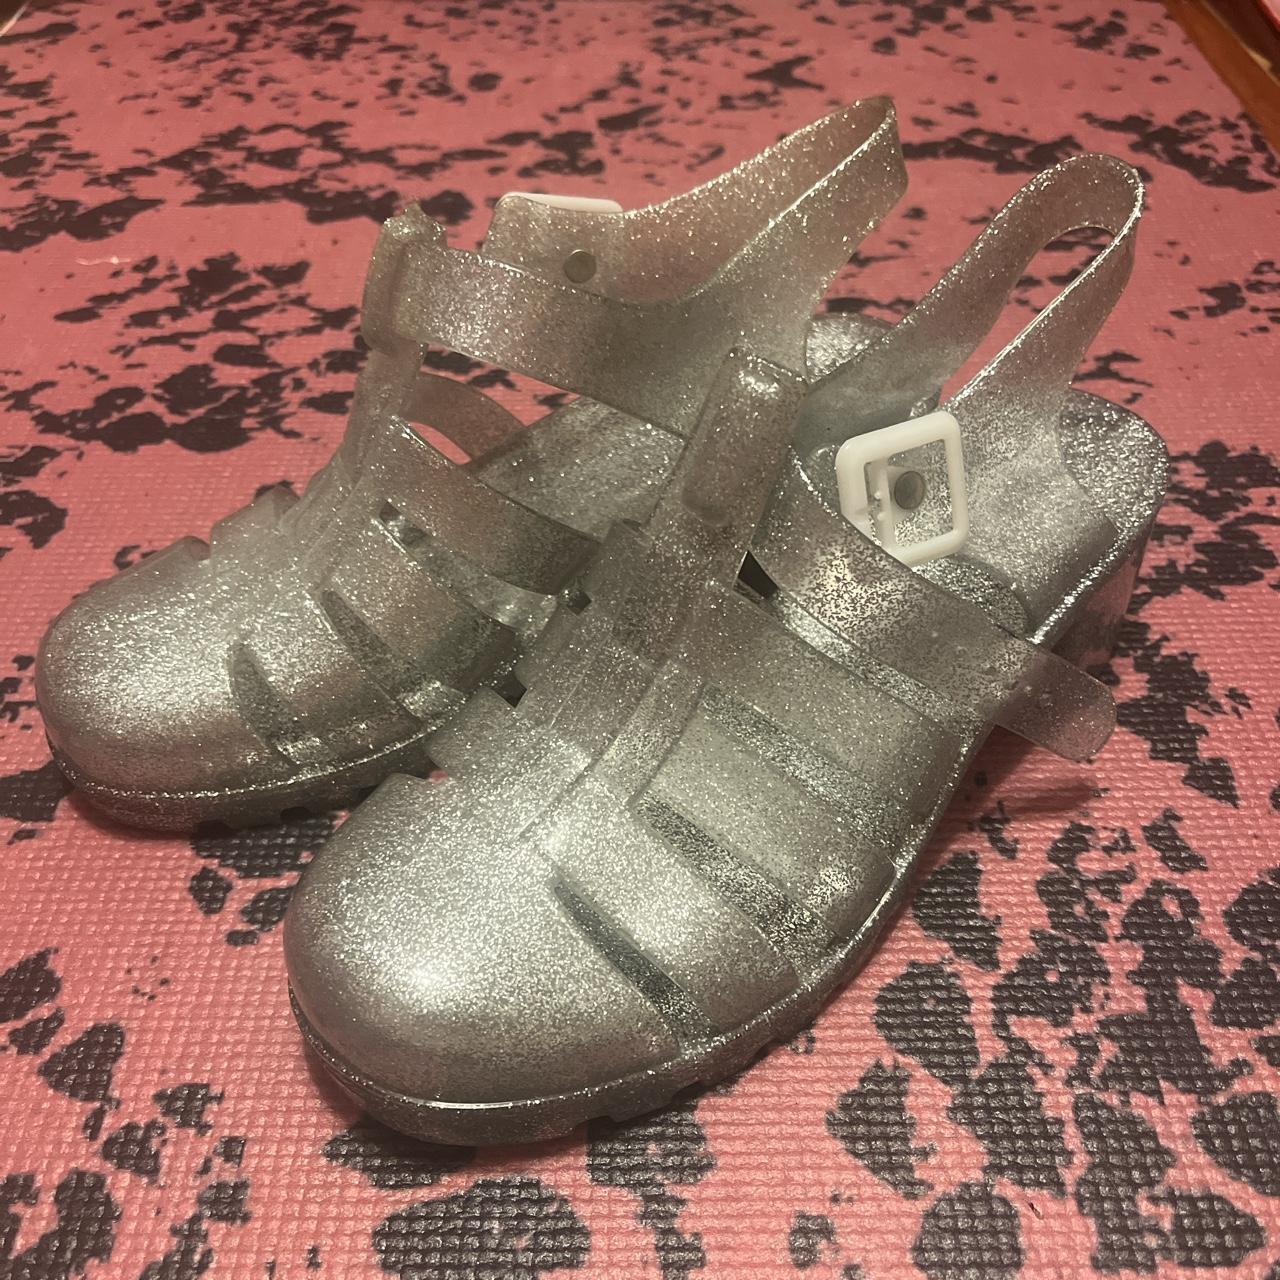 Forever 21 Women's Silver and Grey Sandals | Depop